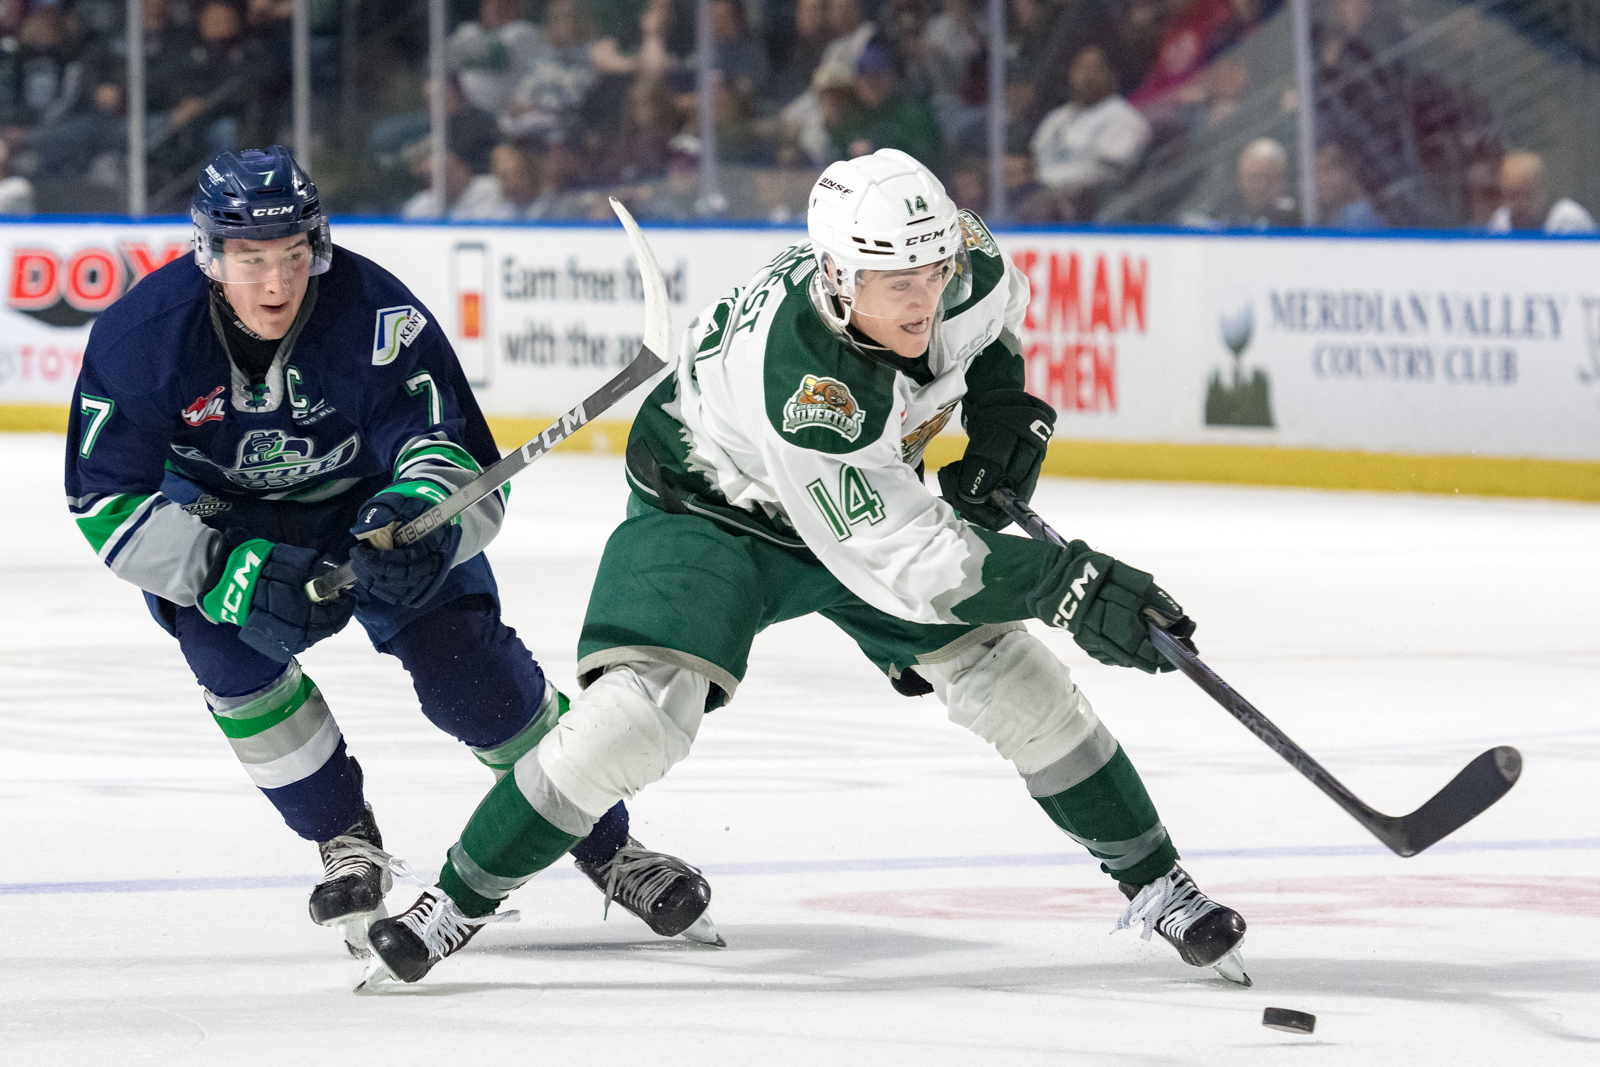 Austin Roest carries the puck for the Everett Silvertips.